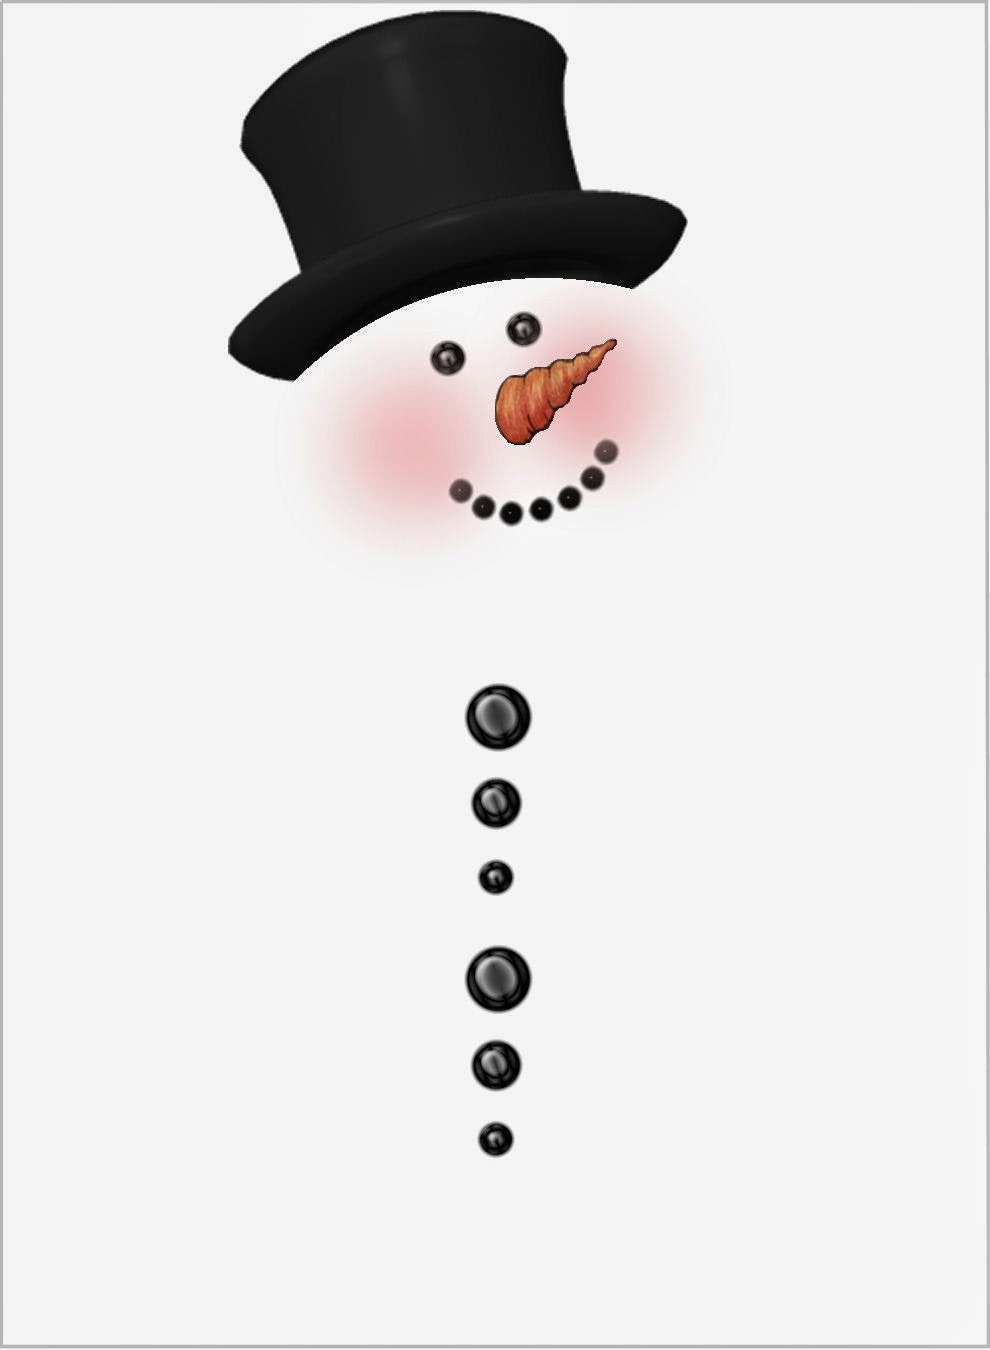 DIY Hershey Bar Snowman. With Free Printables. Oh My Fiesta! in english